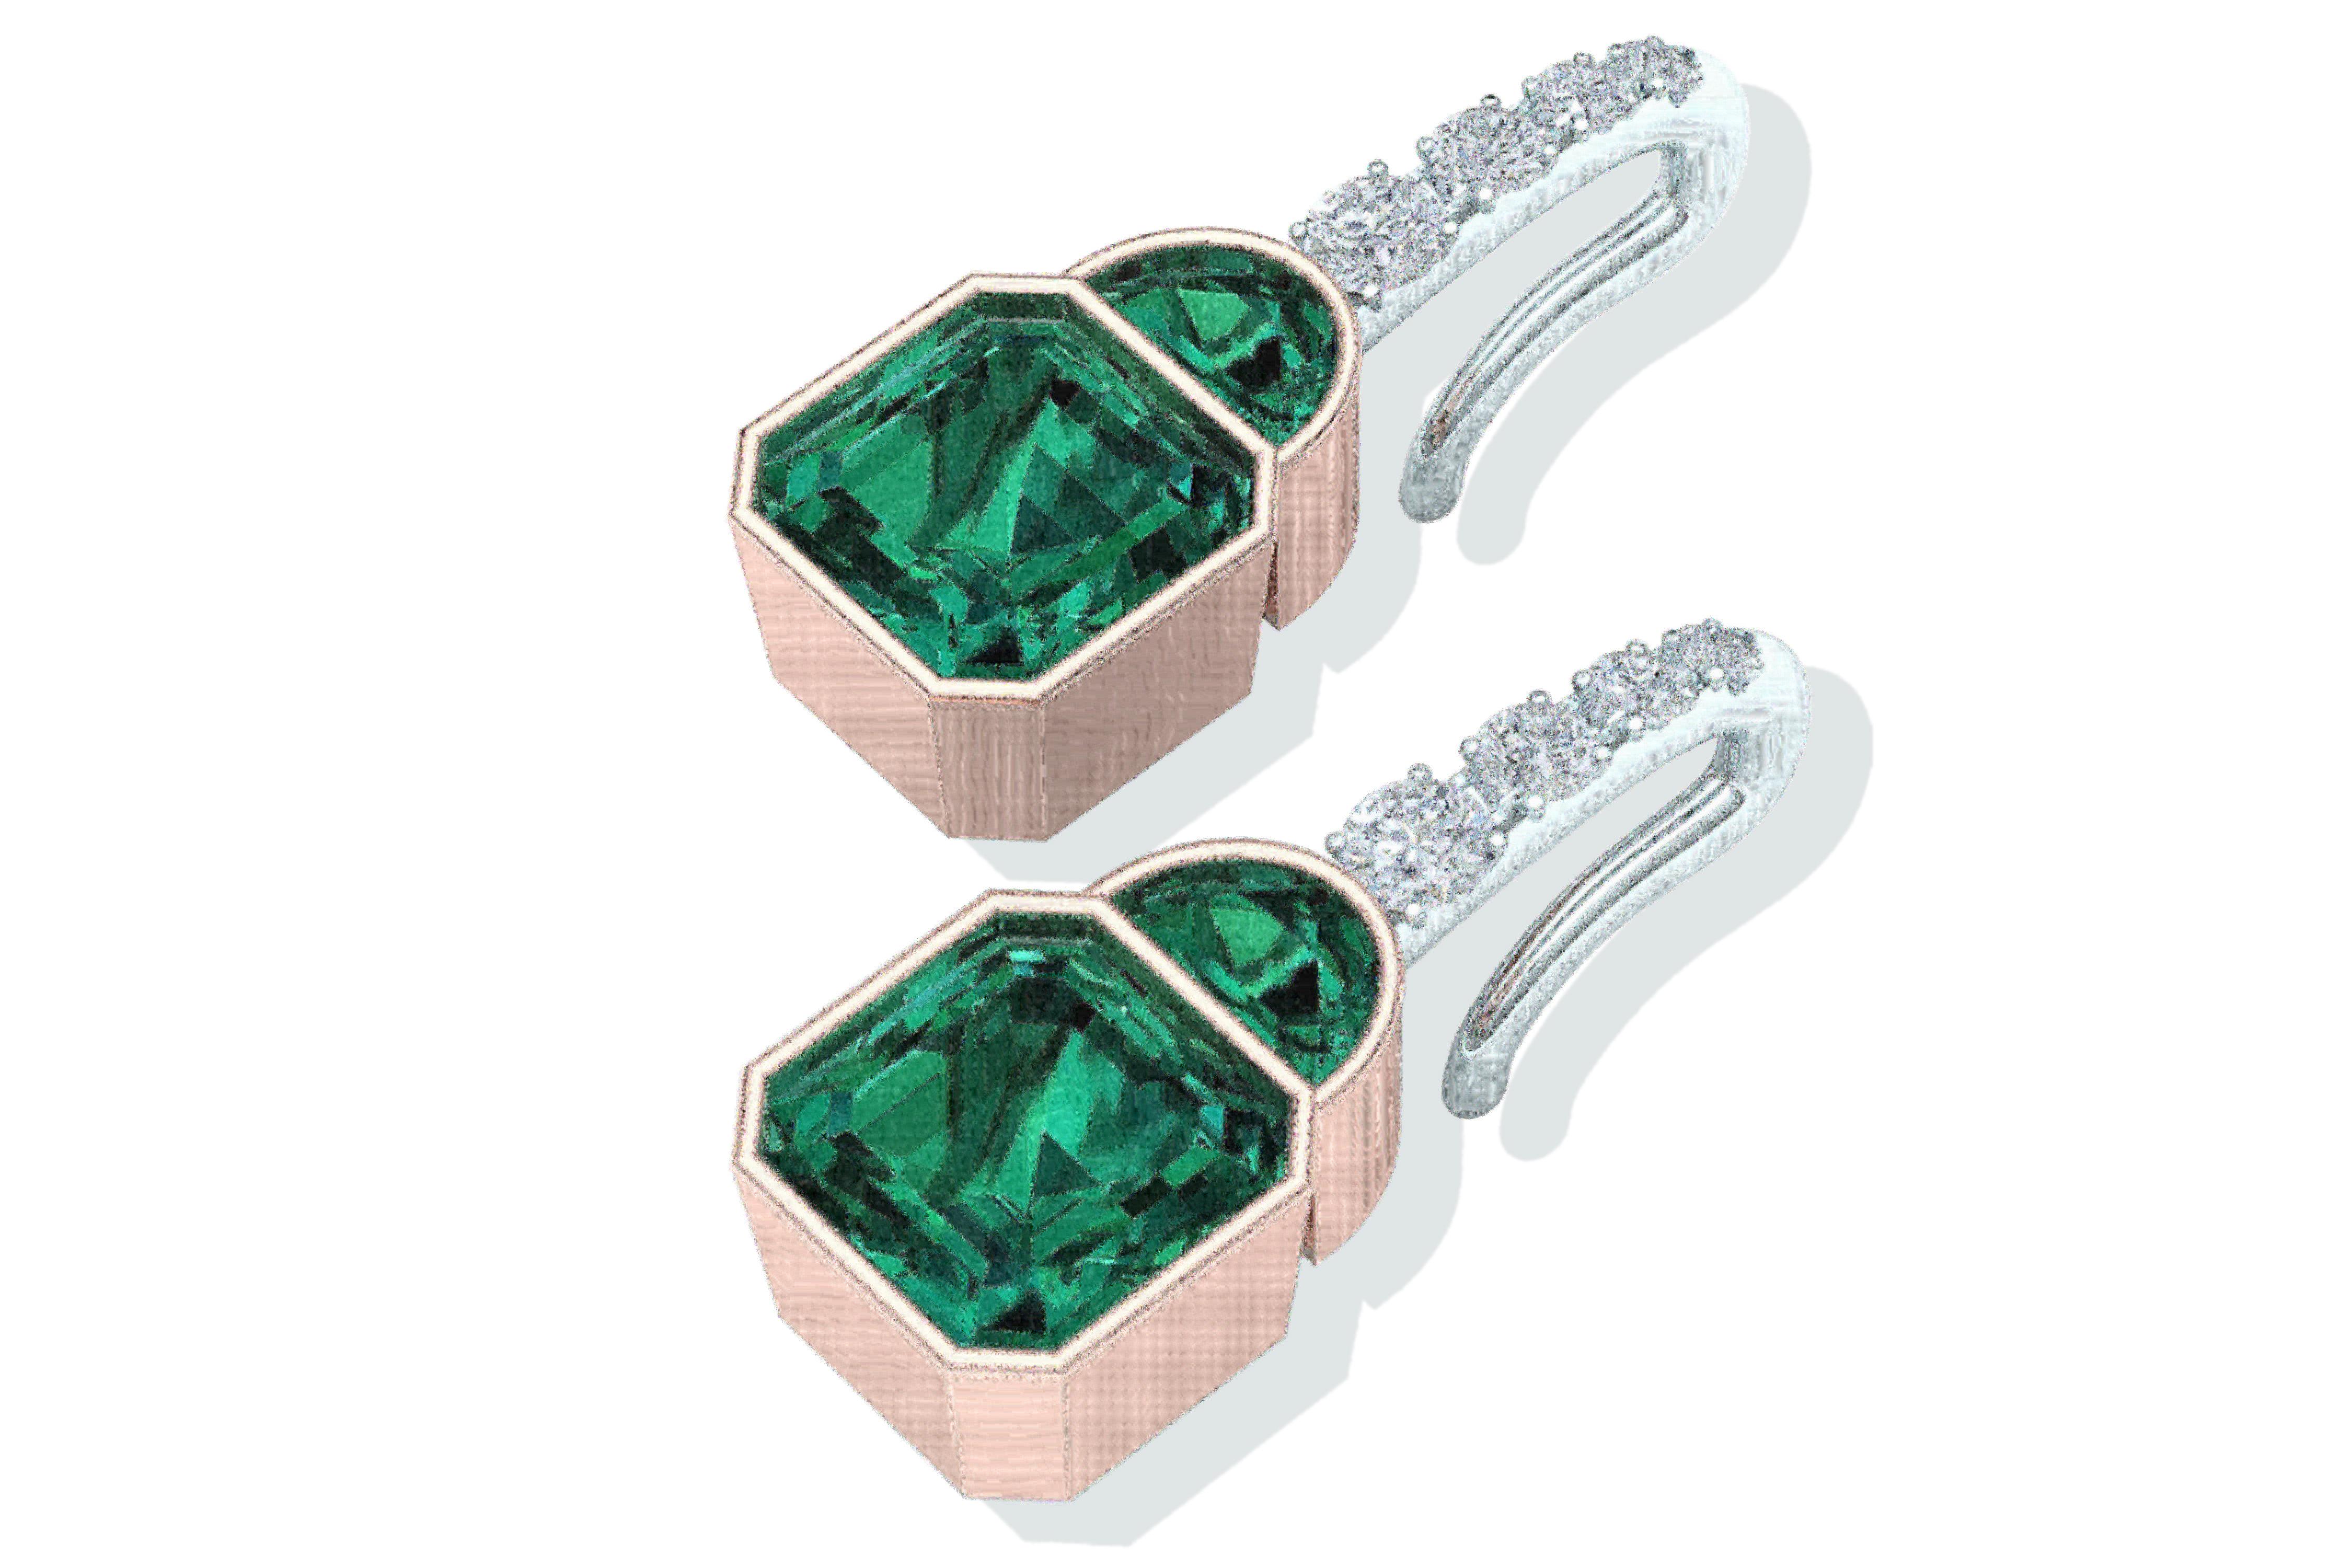 The center stones of each earring are Asscher cut Tourmaline's that exhibit a rich deep blue green color and are eye clean.  The center stones are topped by two half-moon cut Tourmaline's that match the bottom Asshers for color and clarity.  Lastly